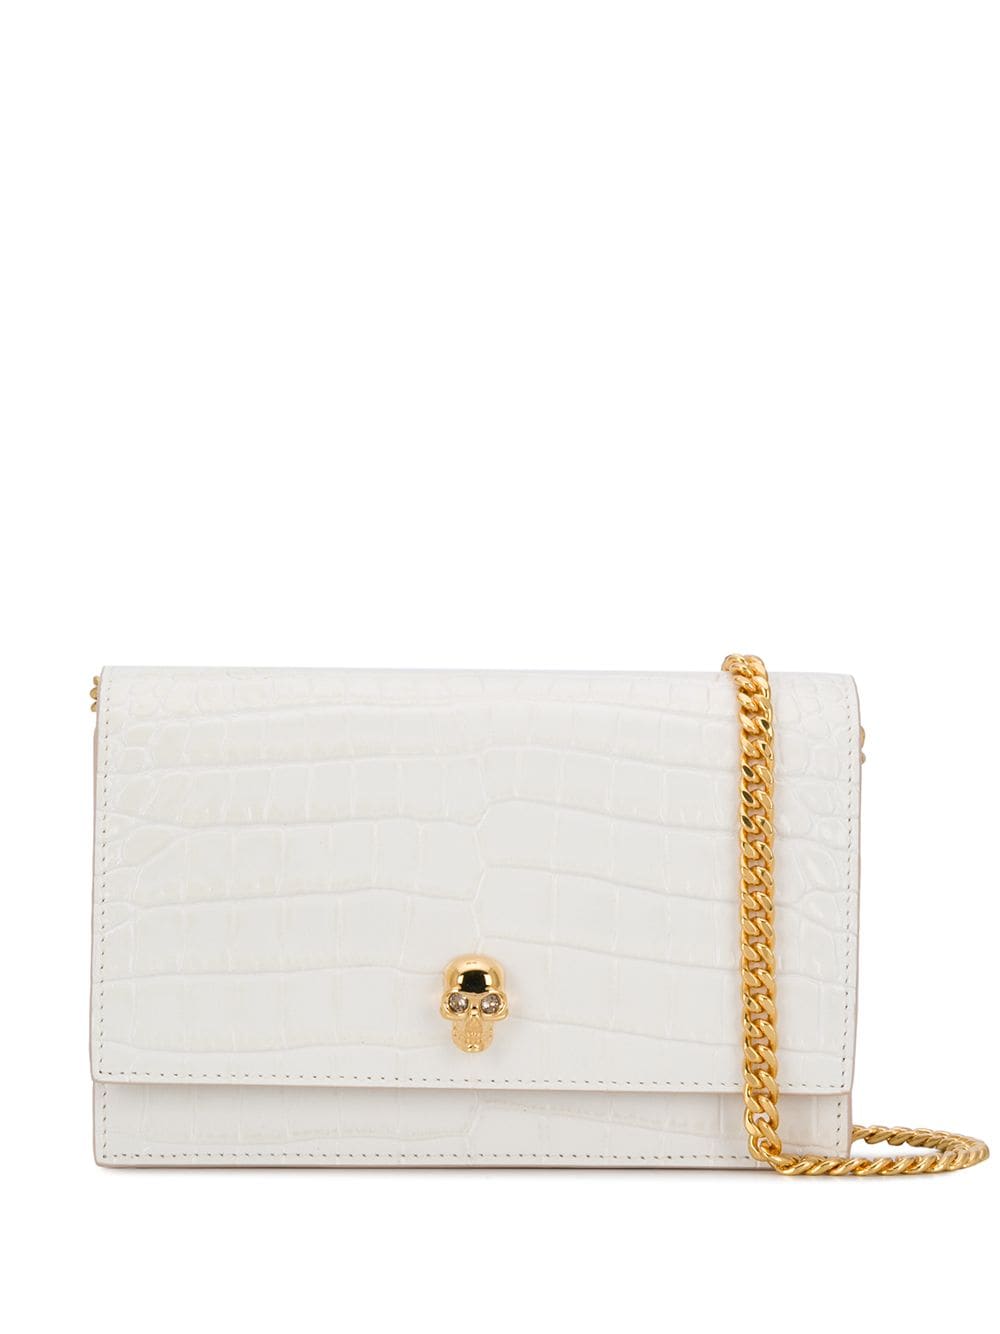 Drop Everything! This Alexander McQueen Bag Is $700 Off! | Us Weekly